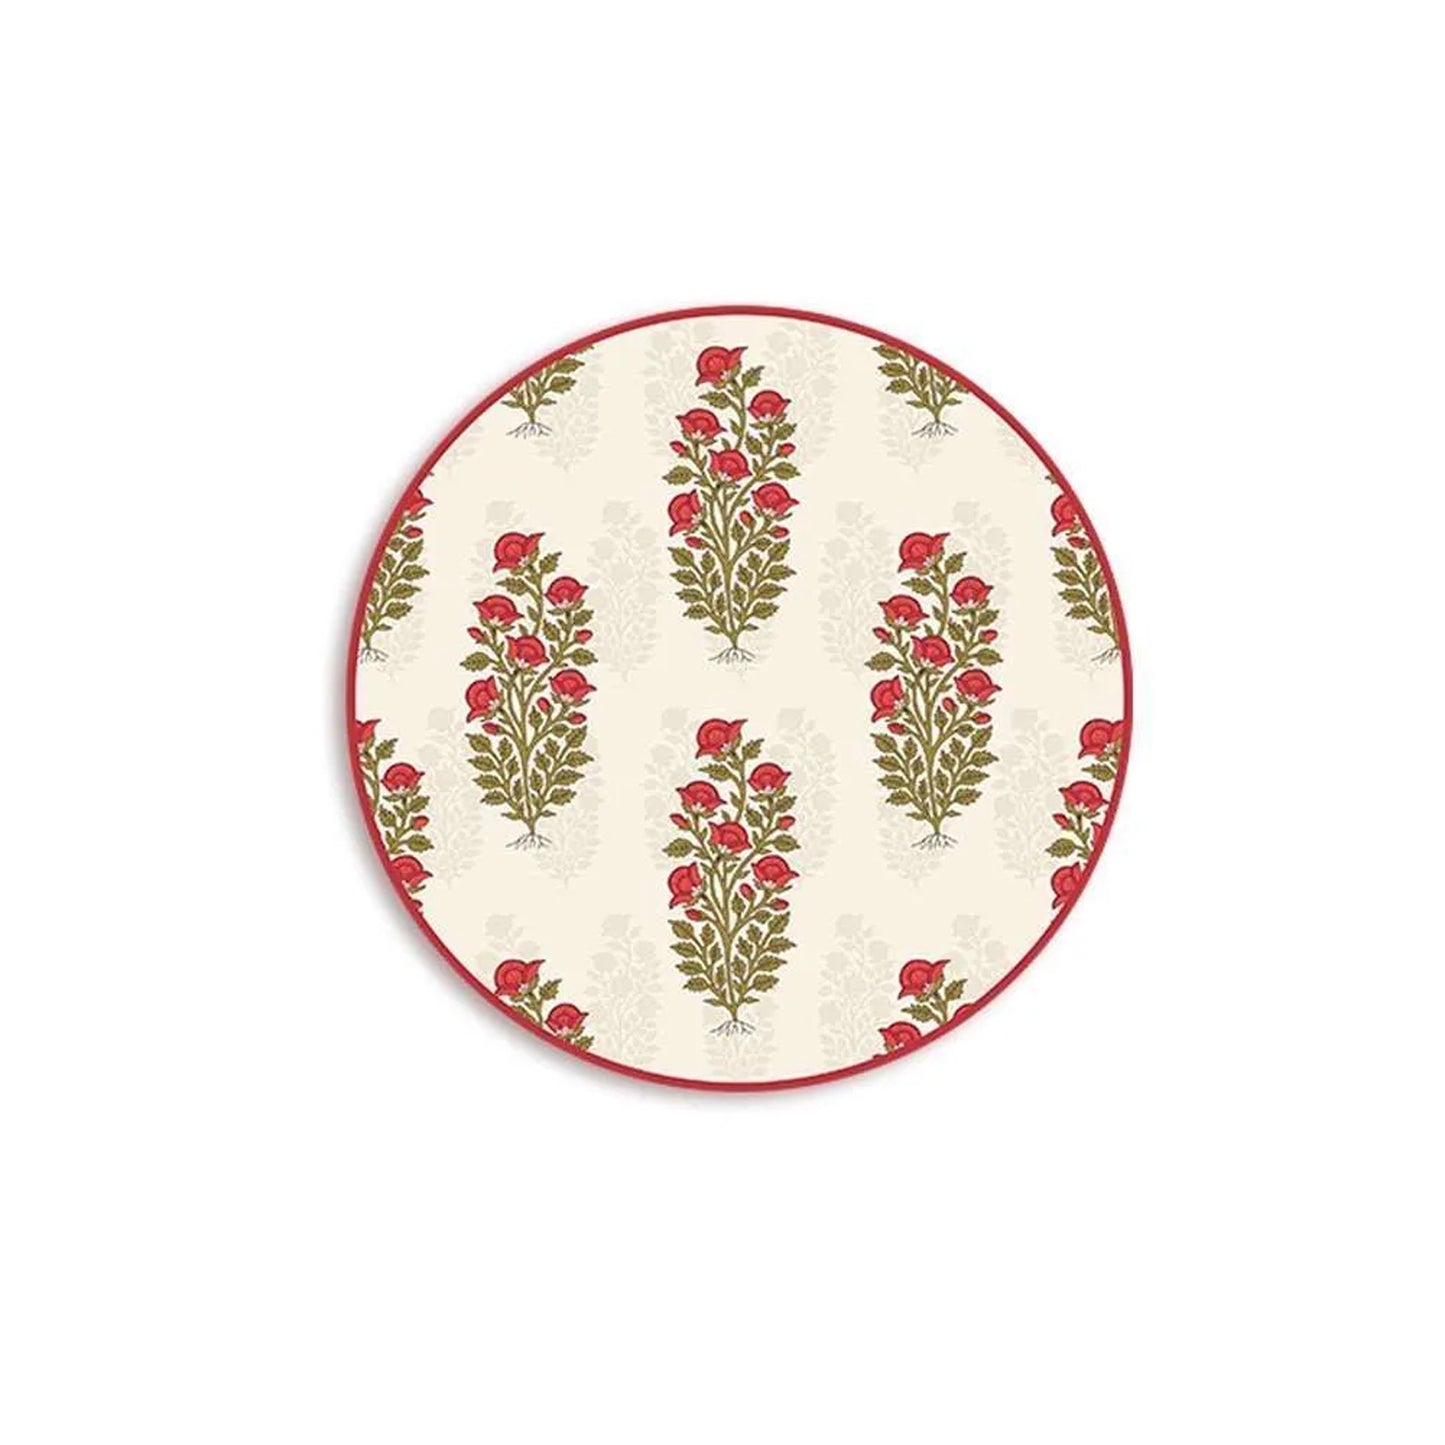 Mughal Motifs with ethnic border Trivets | CST 027 (set of 2)